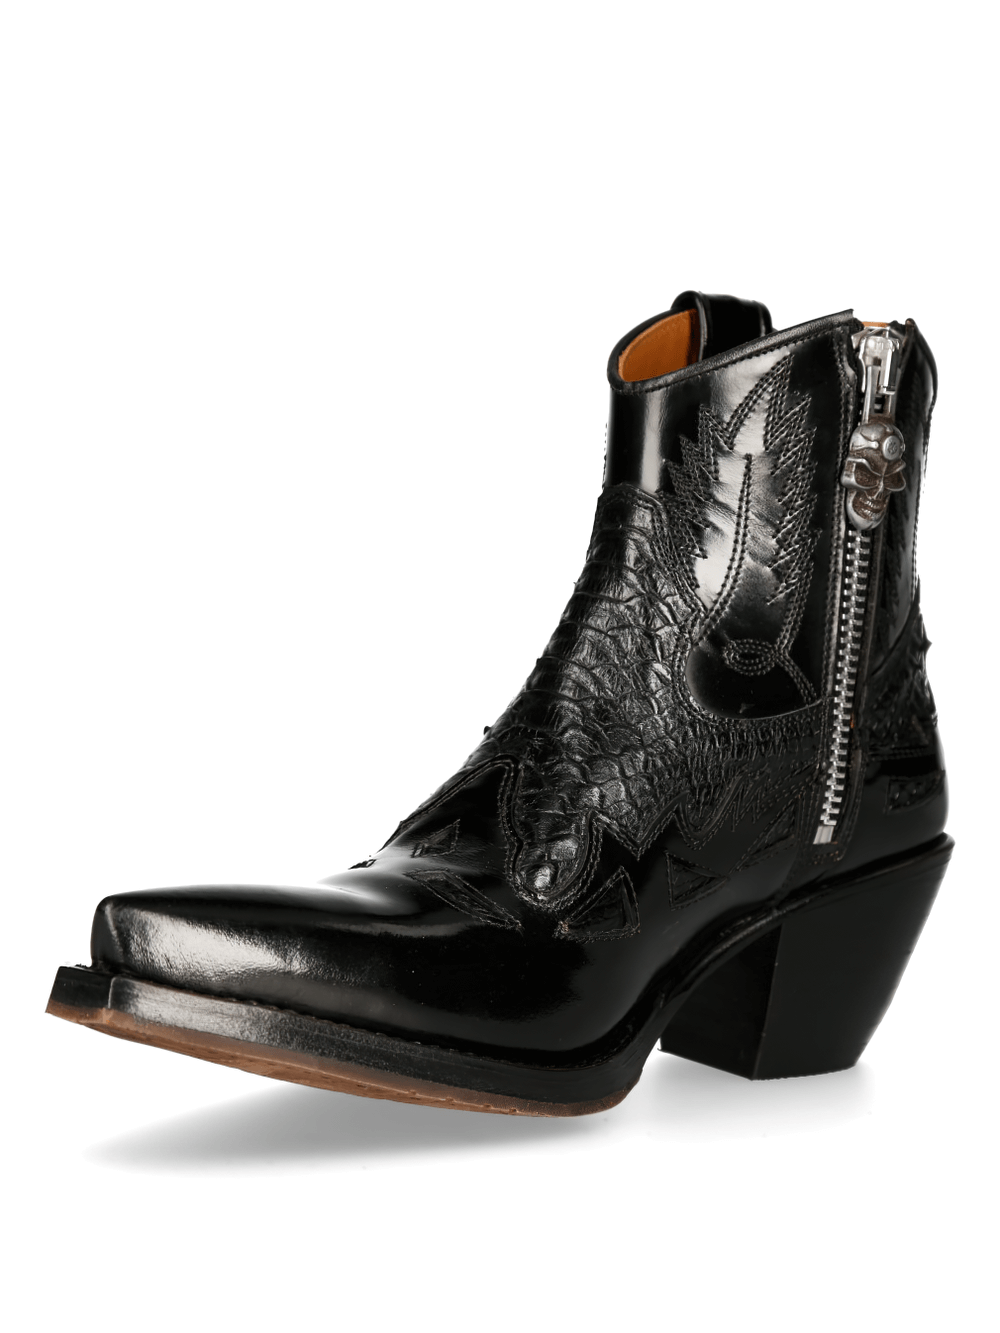 NEW ROCK Embossed Black Western High Boots with Zipper